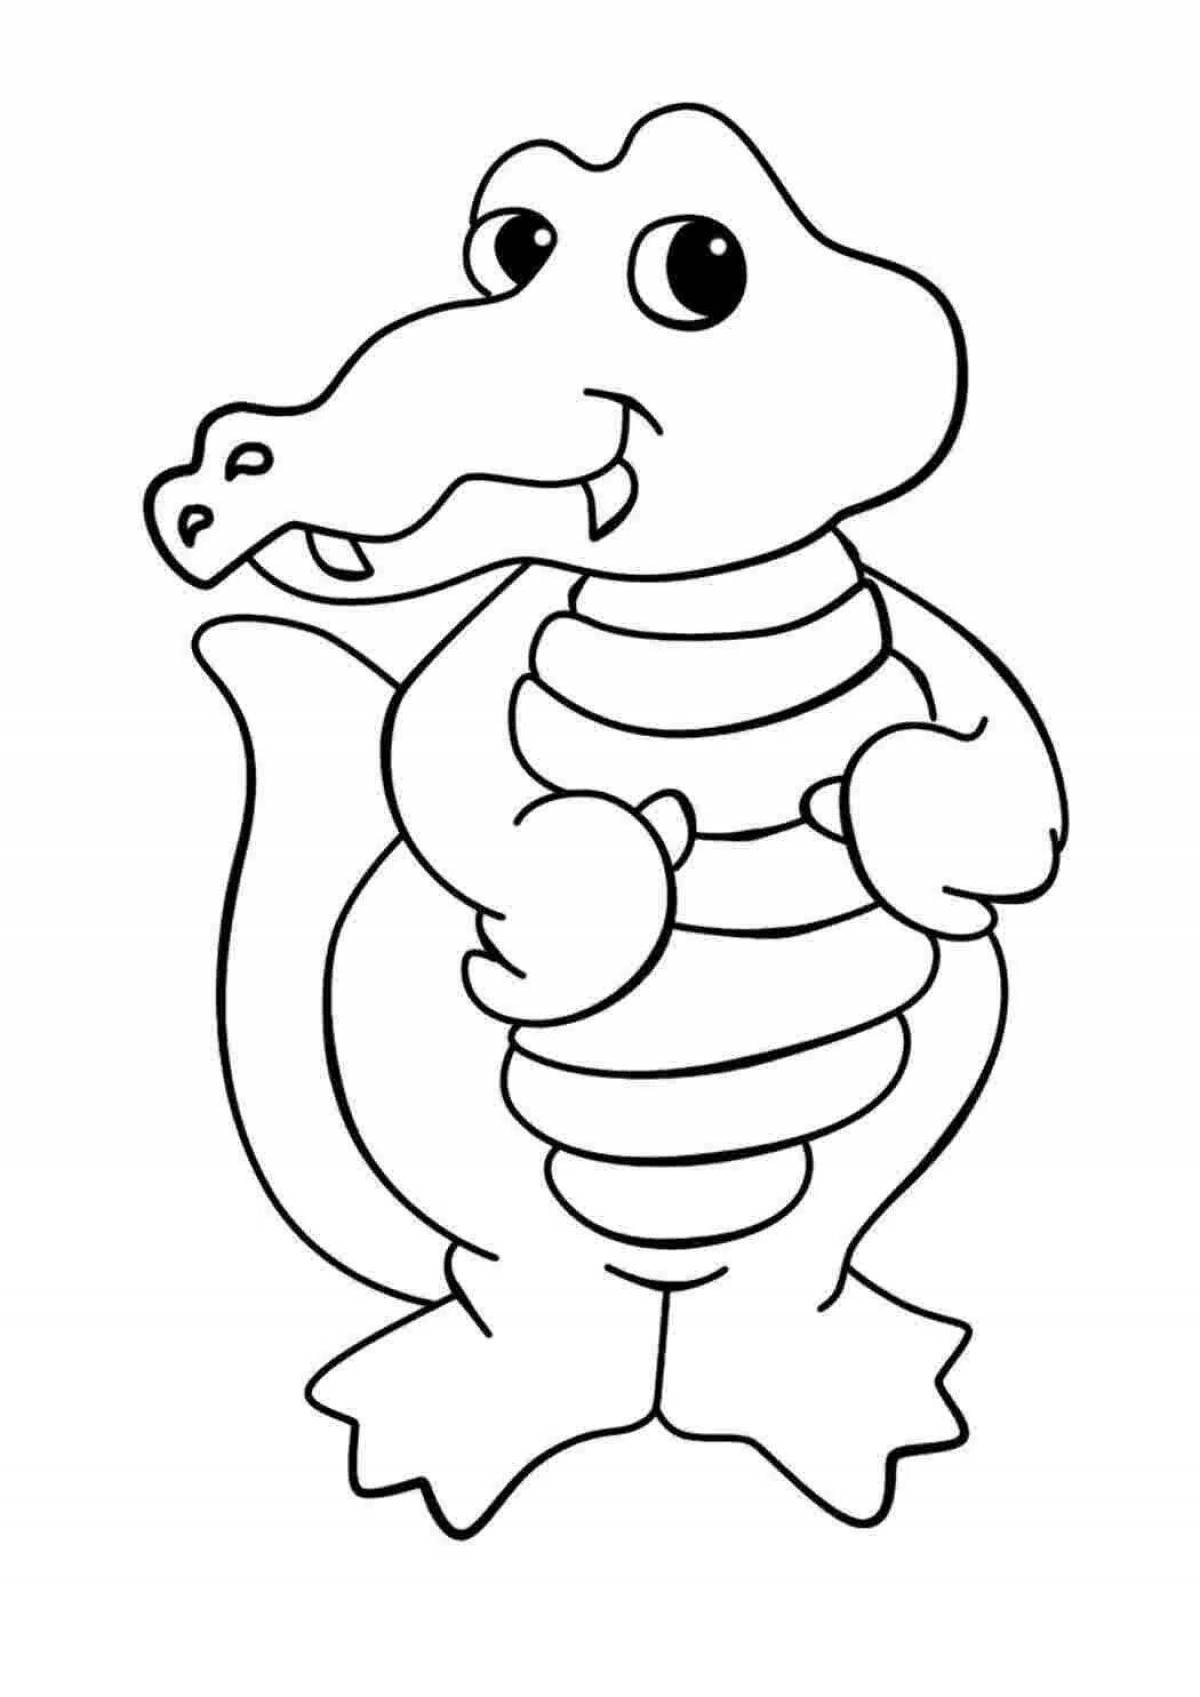 African animals coloring page for kids